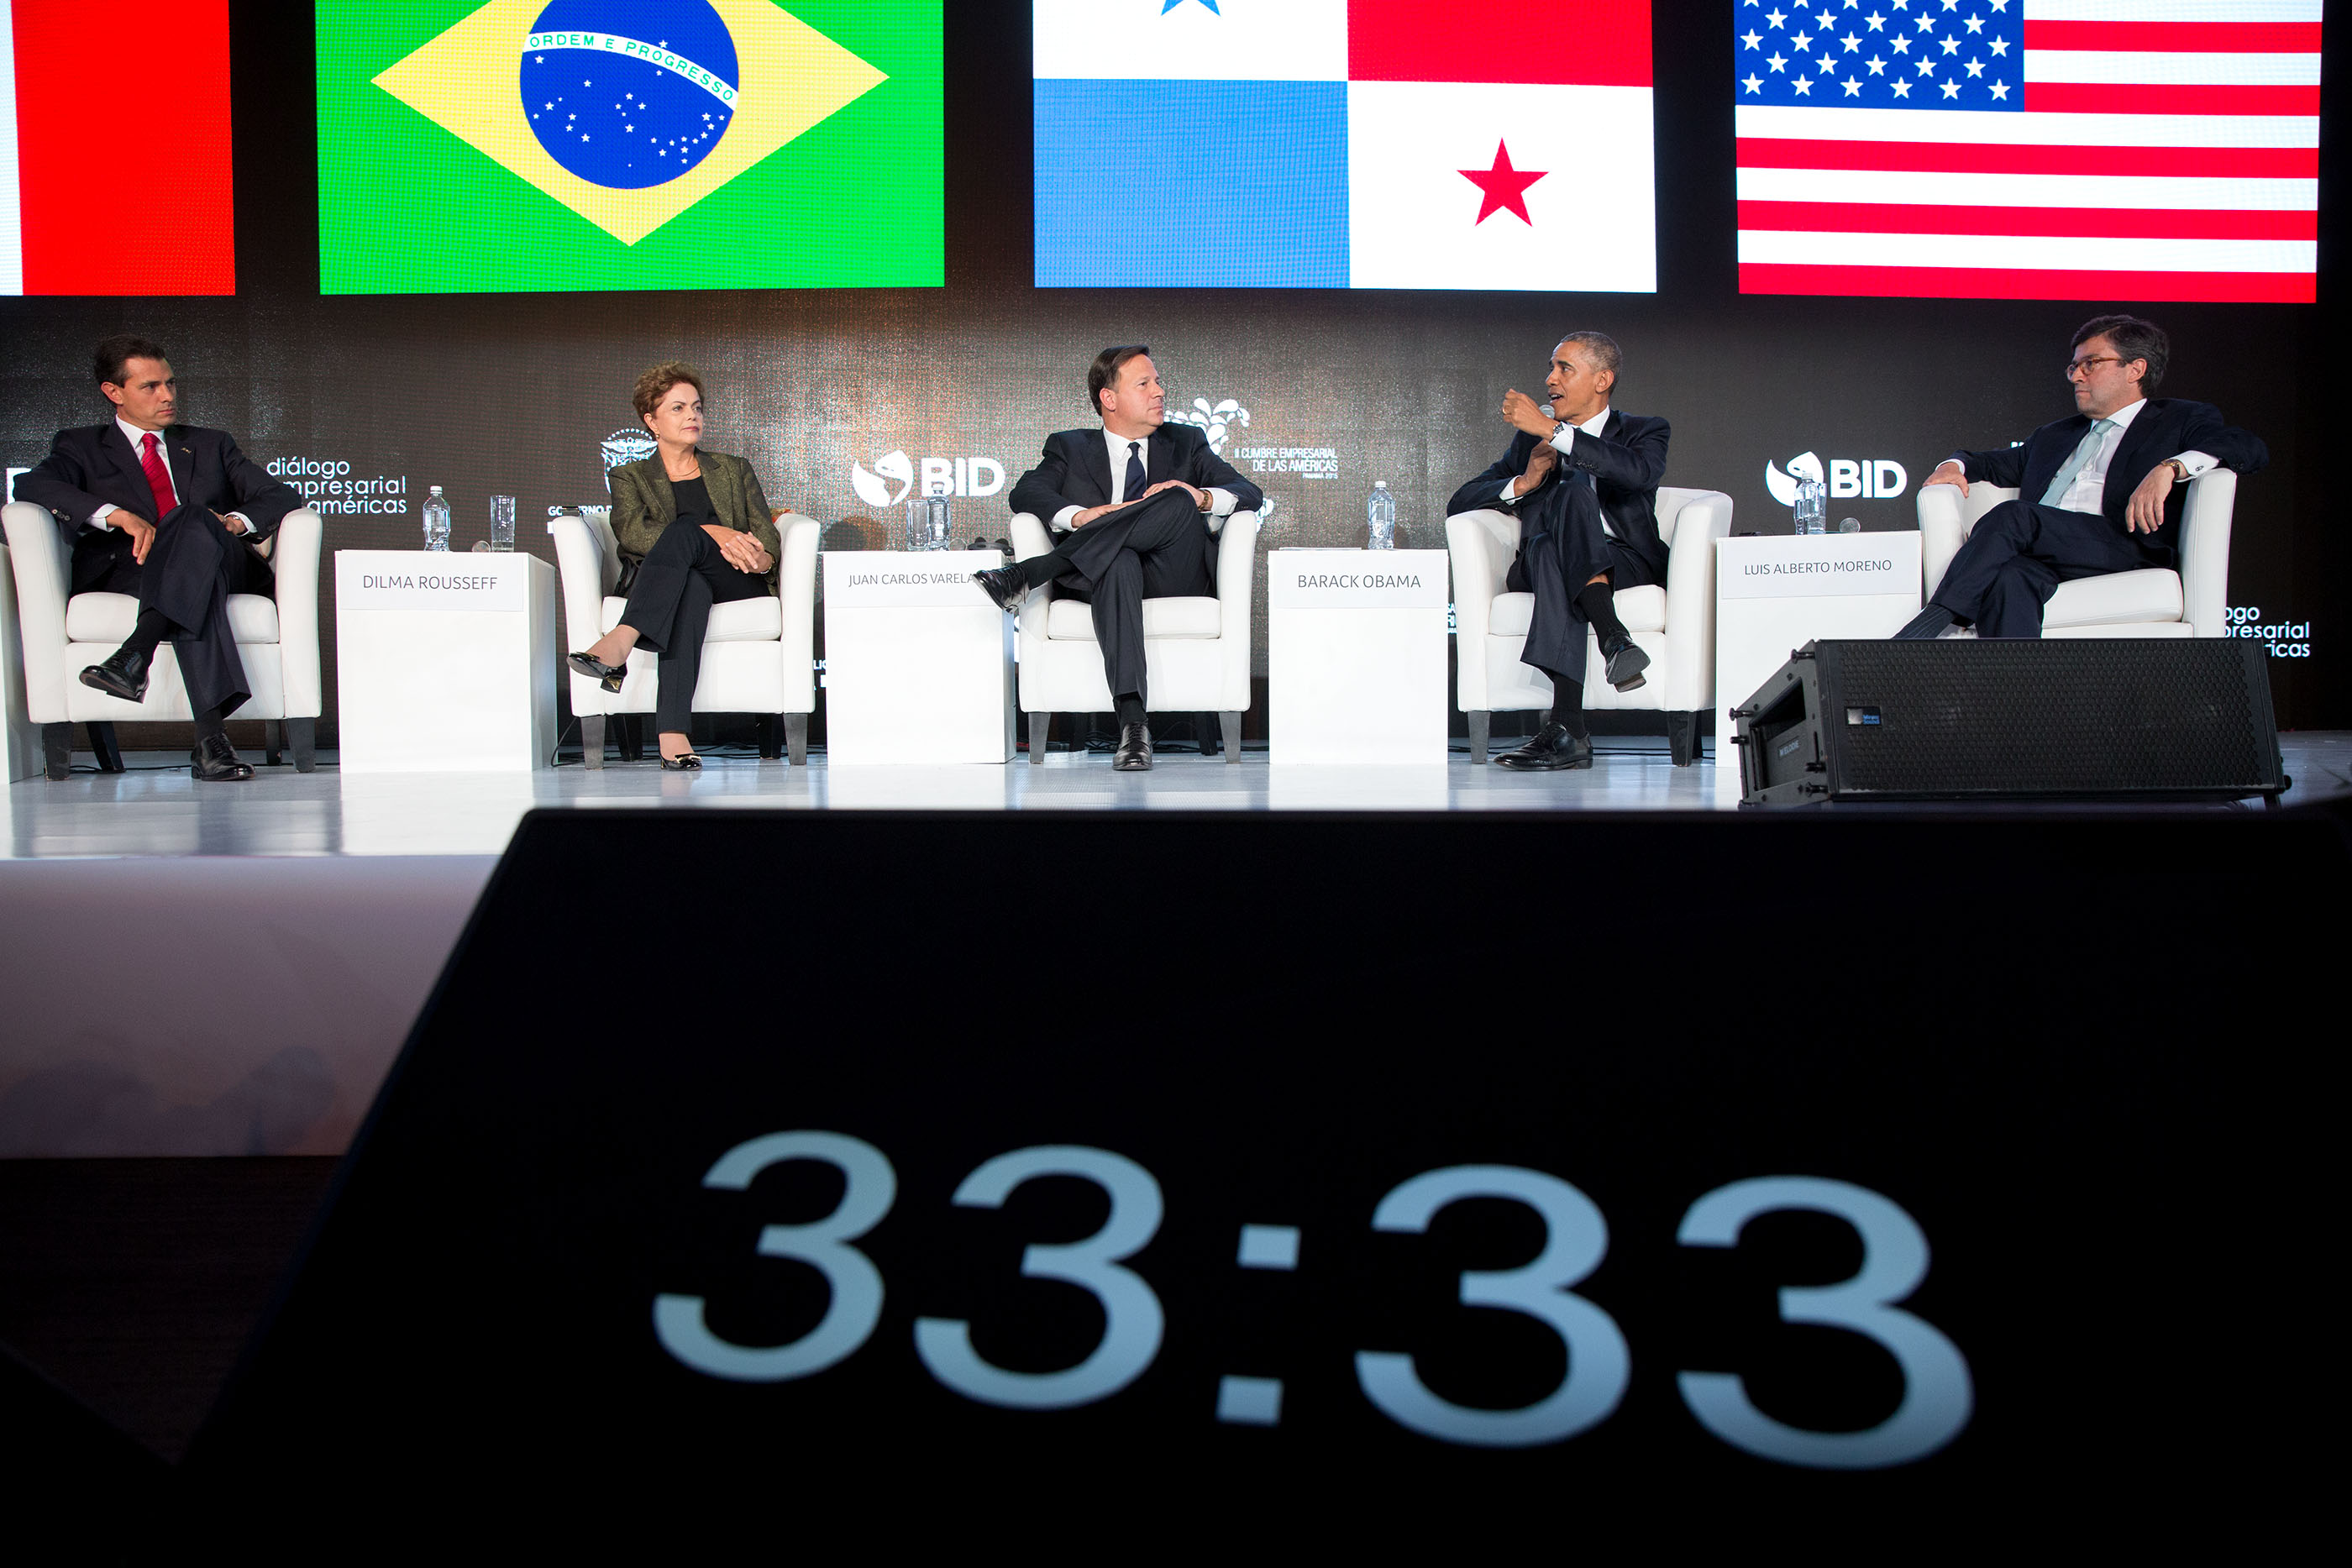 President Obama participates in the CEO Summit of the Americas with, left to right, President Enrique Peña Nieto of Mexico, President Dilma Rousseff of Brazil, President Juan Carlos Varela of Panama and International Development Bank President Luis Alberto Moreno. (Official White House Photo by Pete Souza)